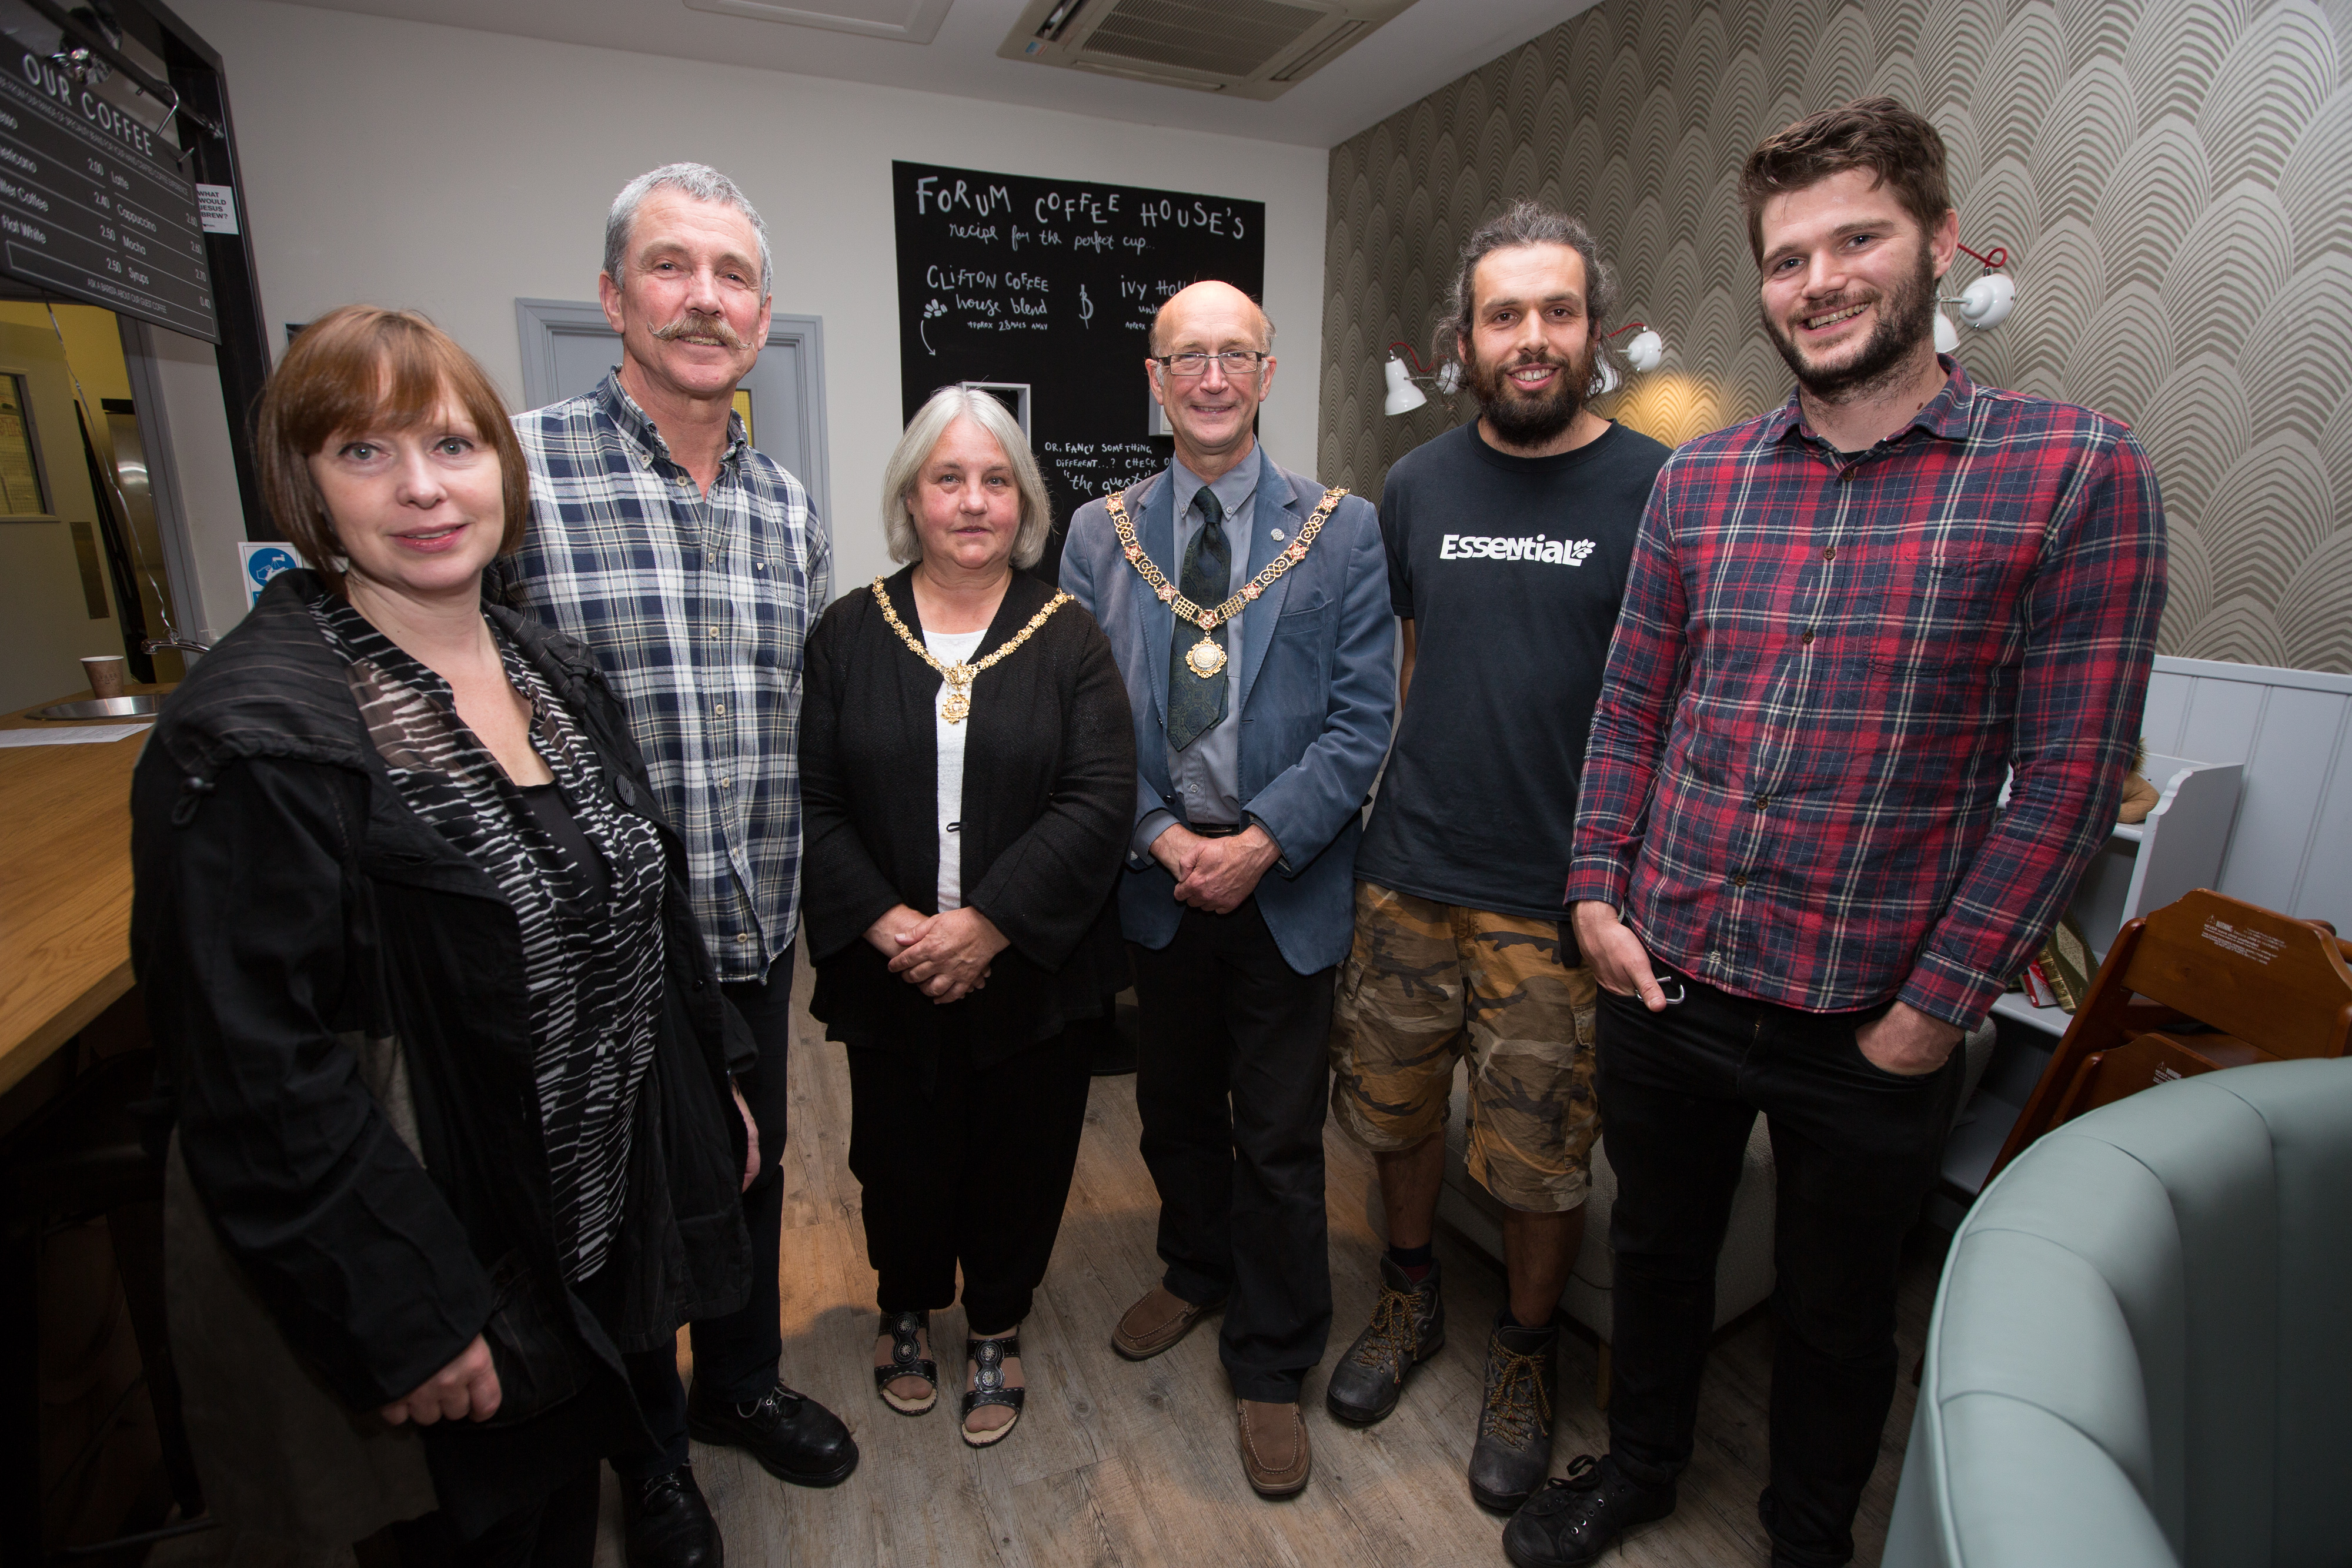 Virgina King & Martin Tracy (The Framing Workshop), The Mayor and Mayoress, Tom Edwards & Rich Sheppard (Co-Directors of Harvest)